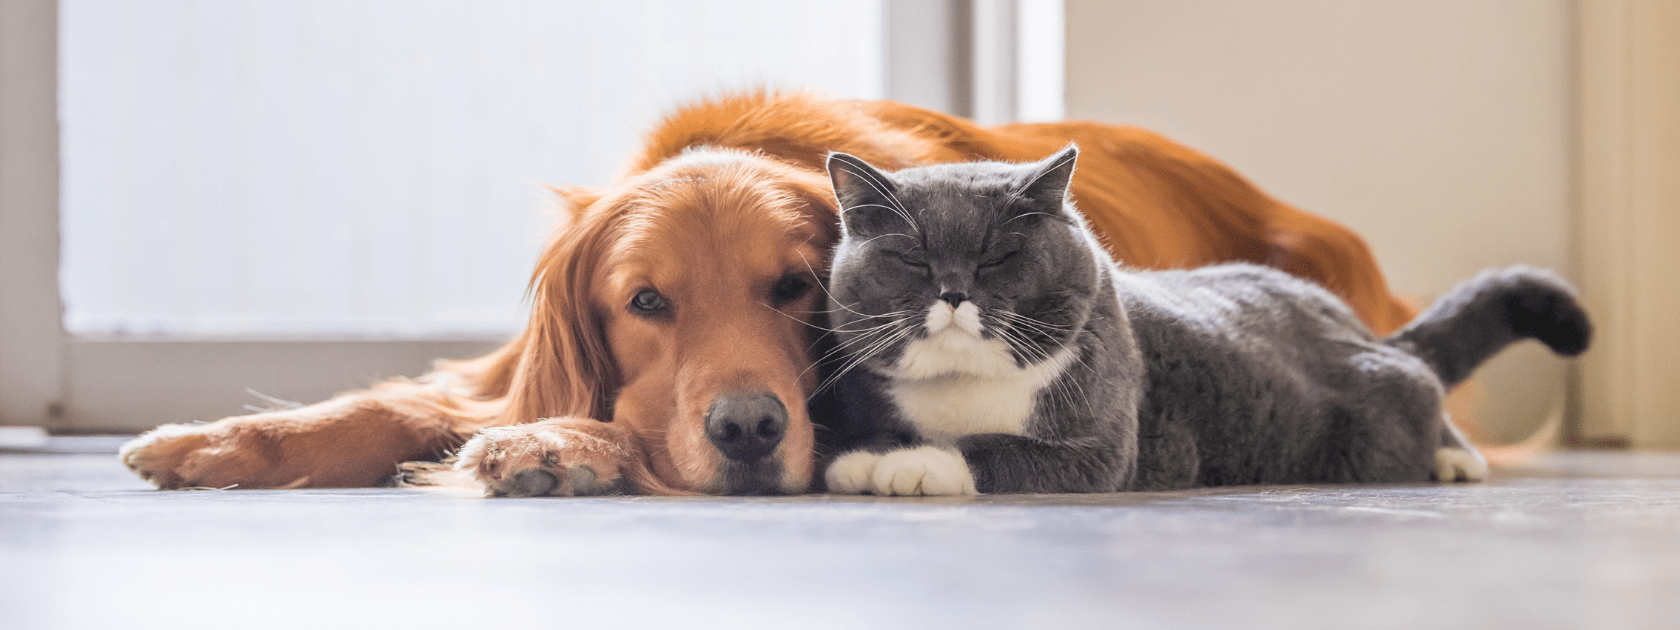 Image of a golden retriever and grey and white cat lying together on the floor.